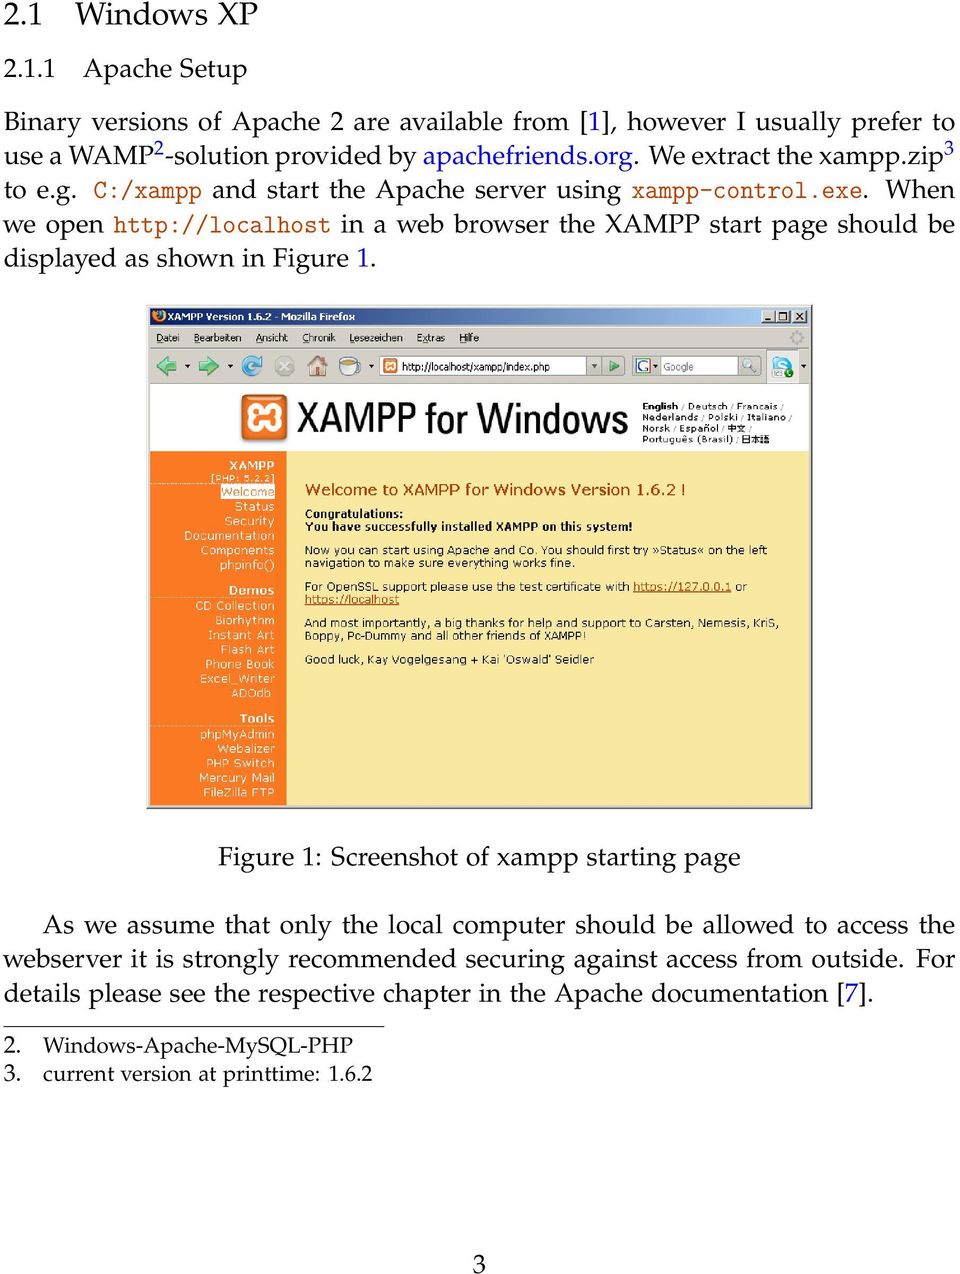 When we open http://localhost in a web browser the XAMPP start page should be displayed as shown in Figure 1.